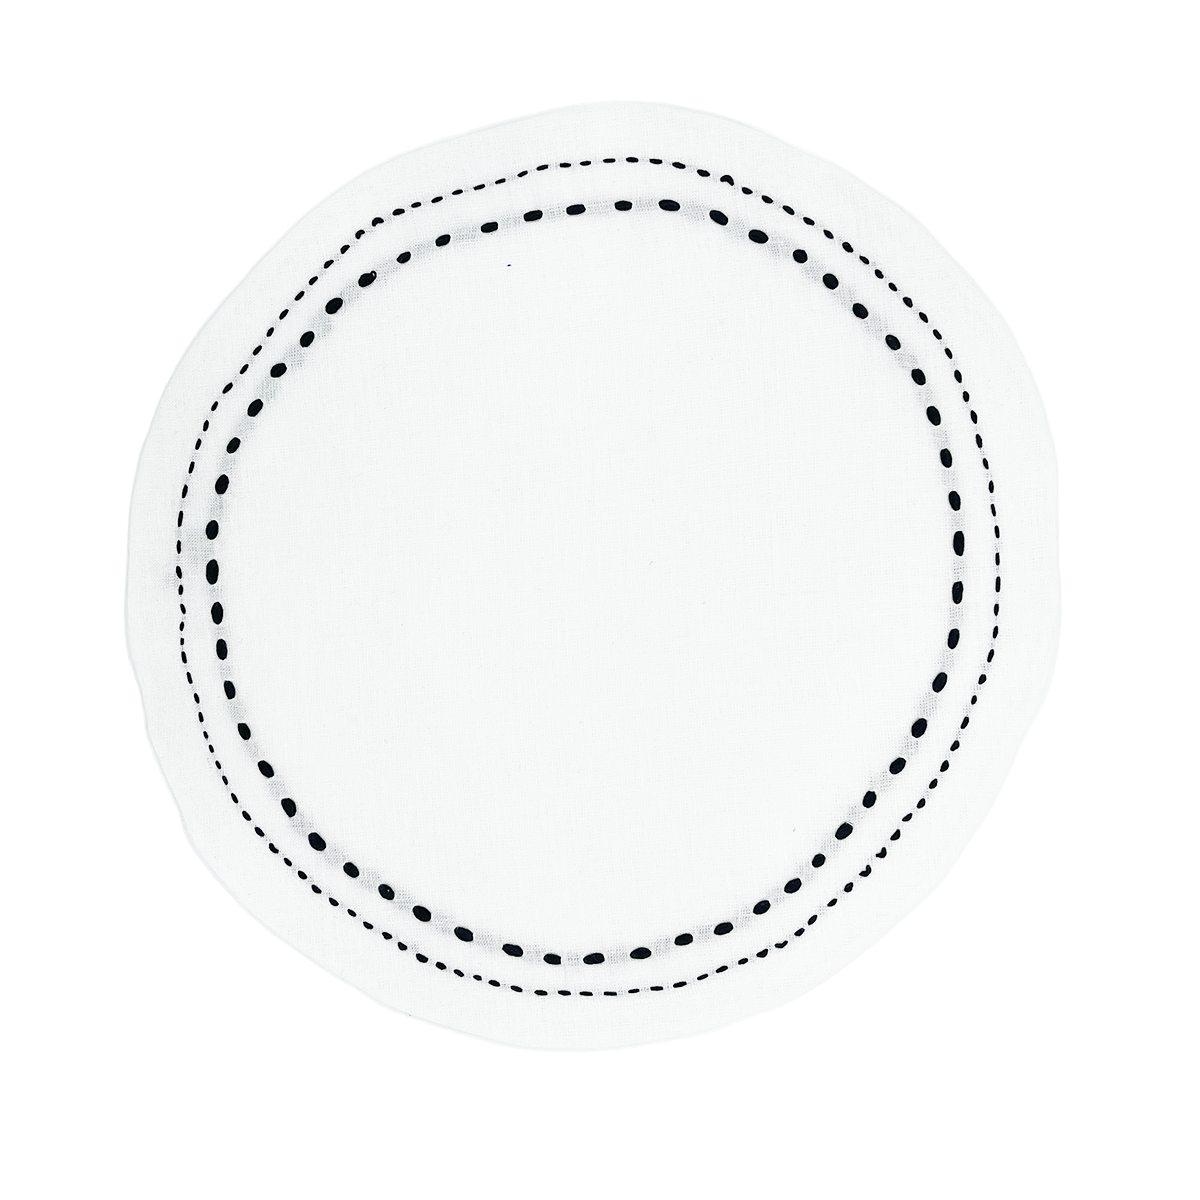 PearlStitch_BlackCircle_1200.PNG